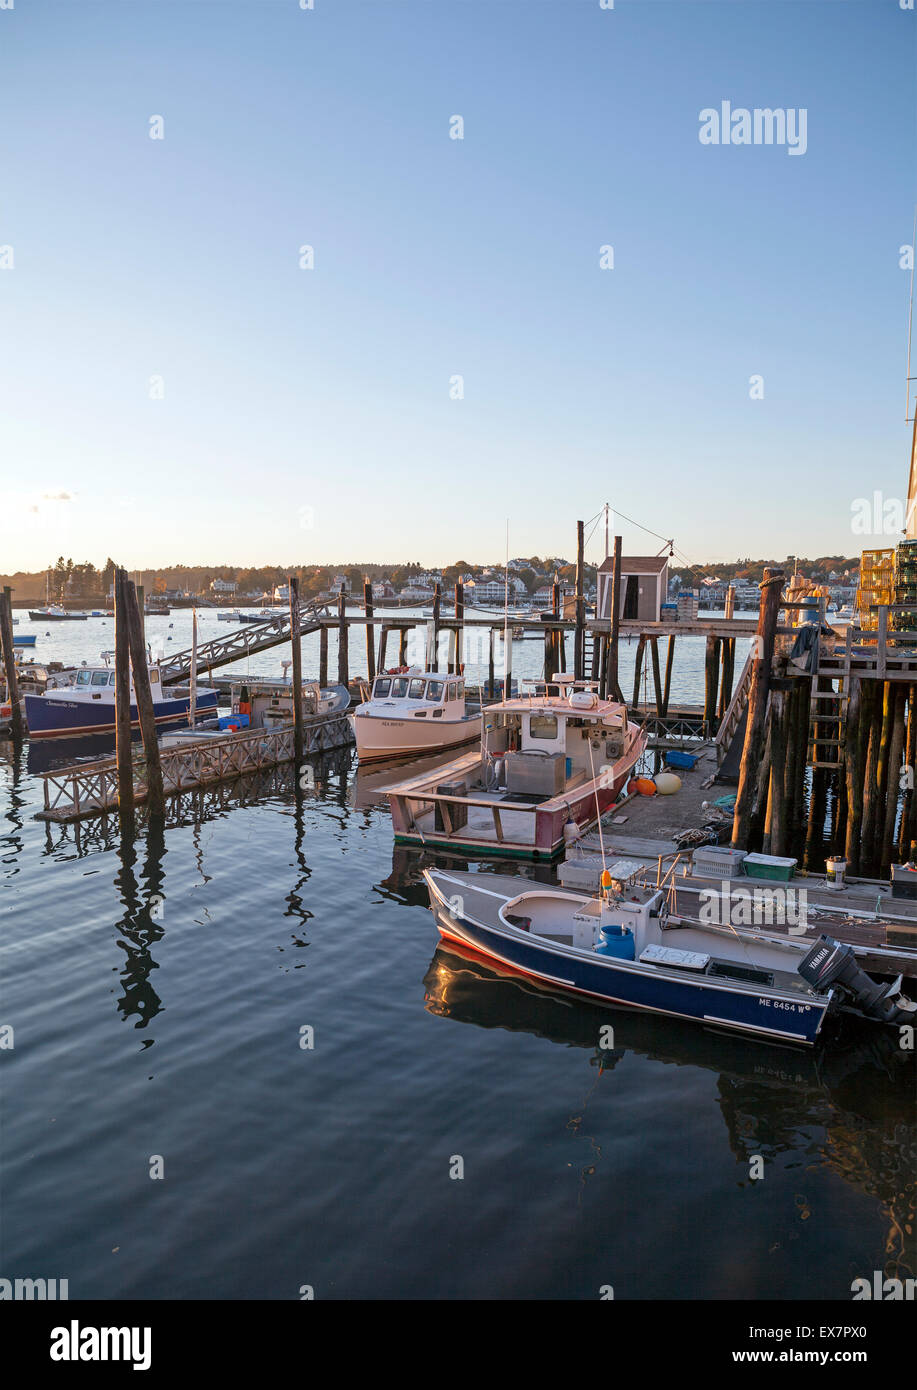 Boats sit in the water at BoothBay Harbor, Maine, USA. Stock Photo